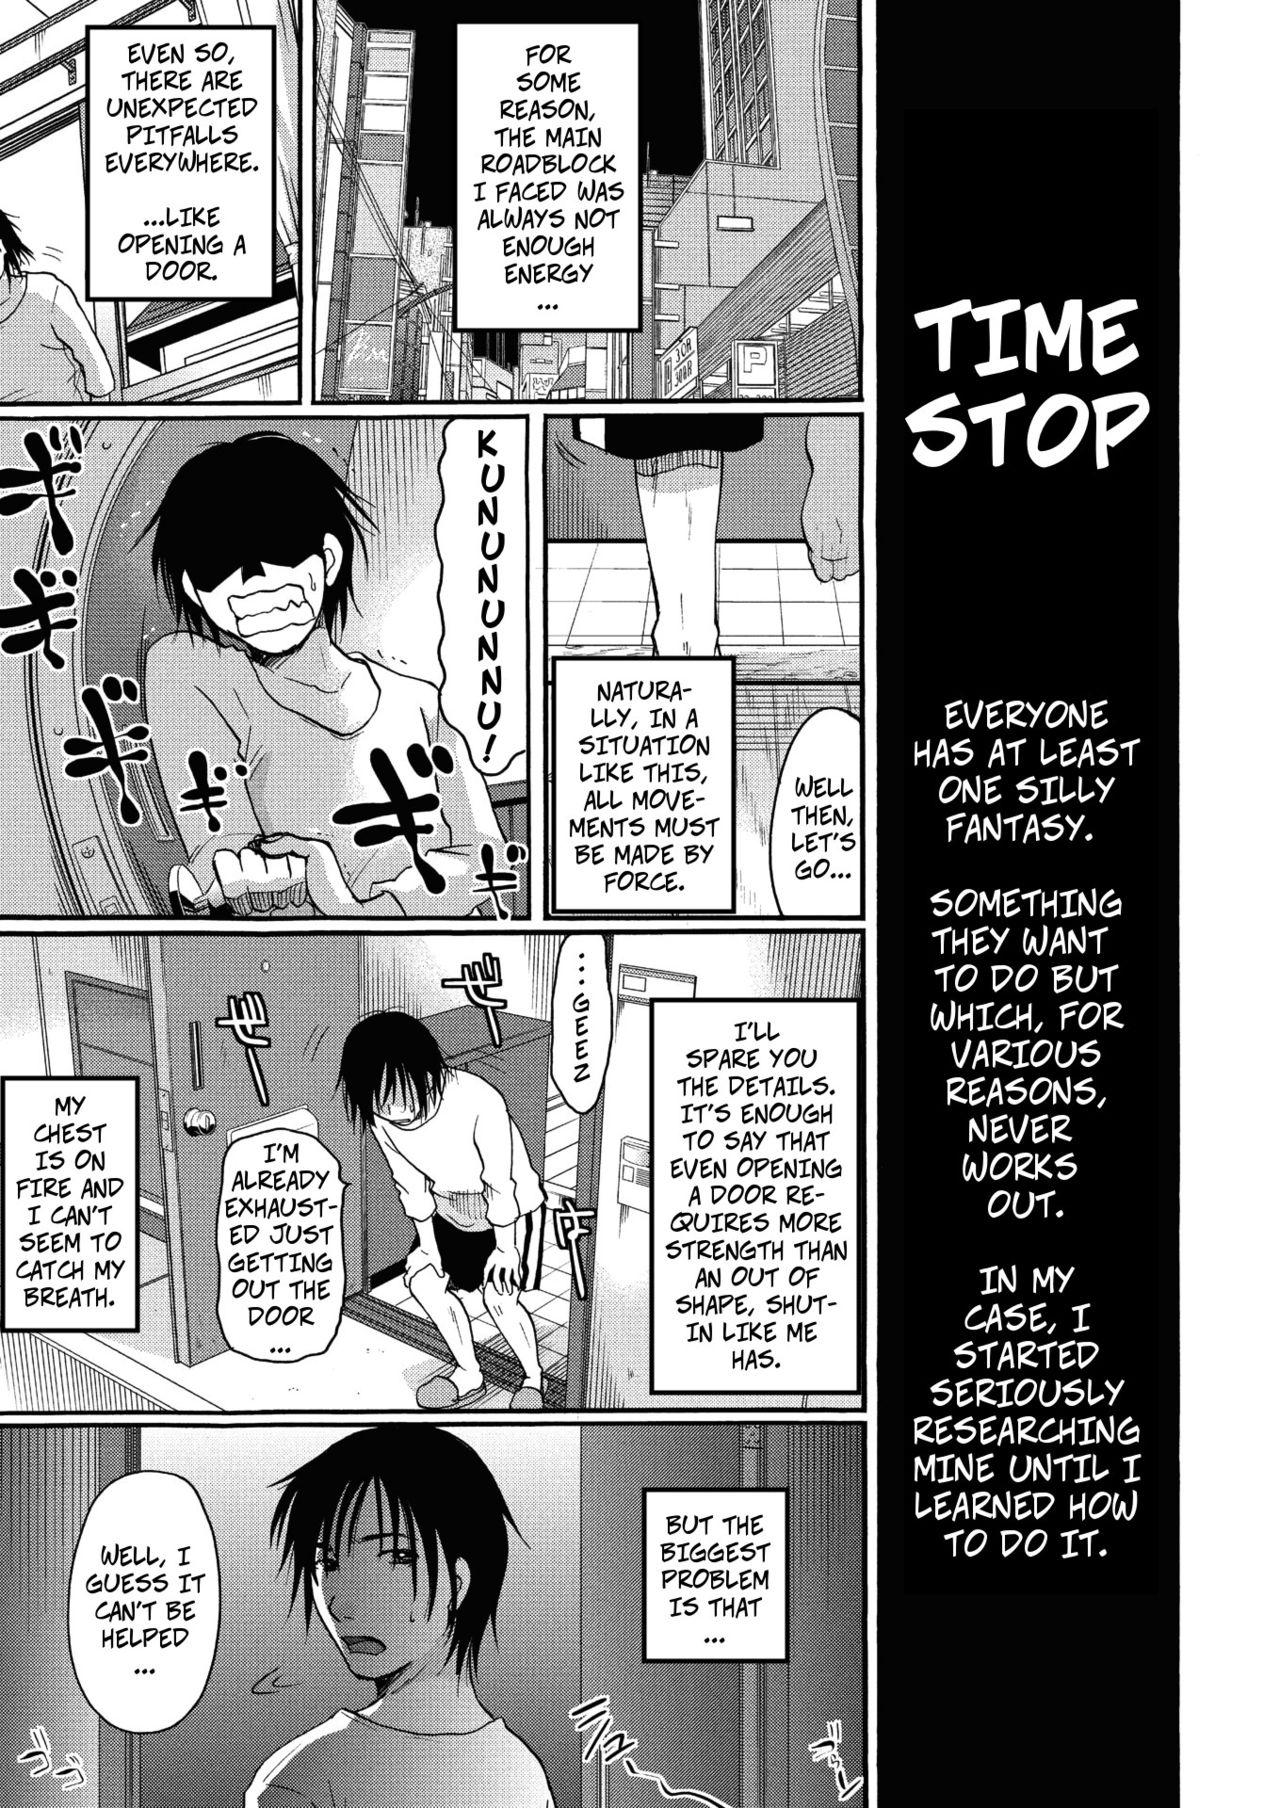 Rimjob How To Stop Time Assfingering - Page 3